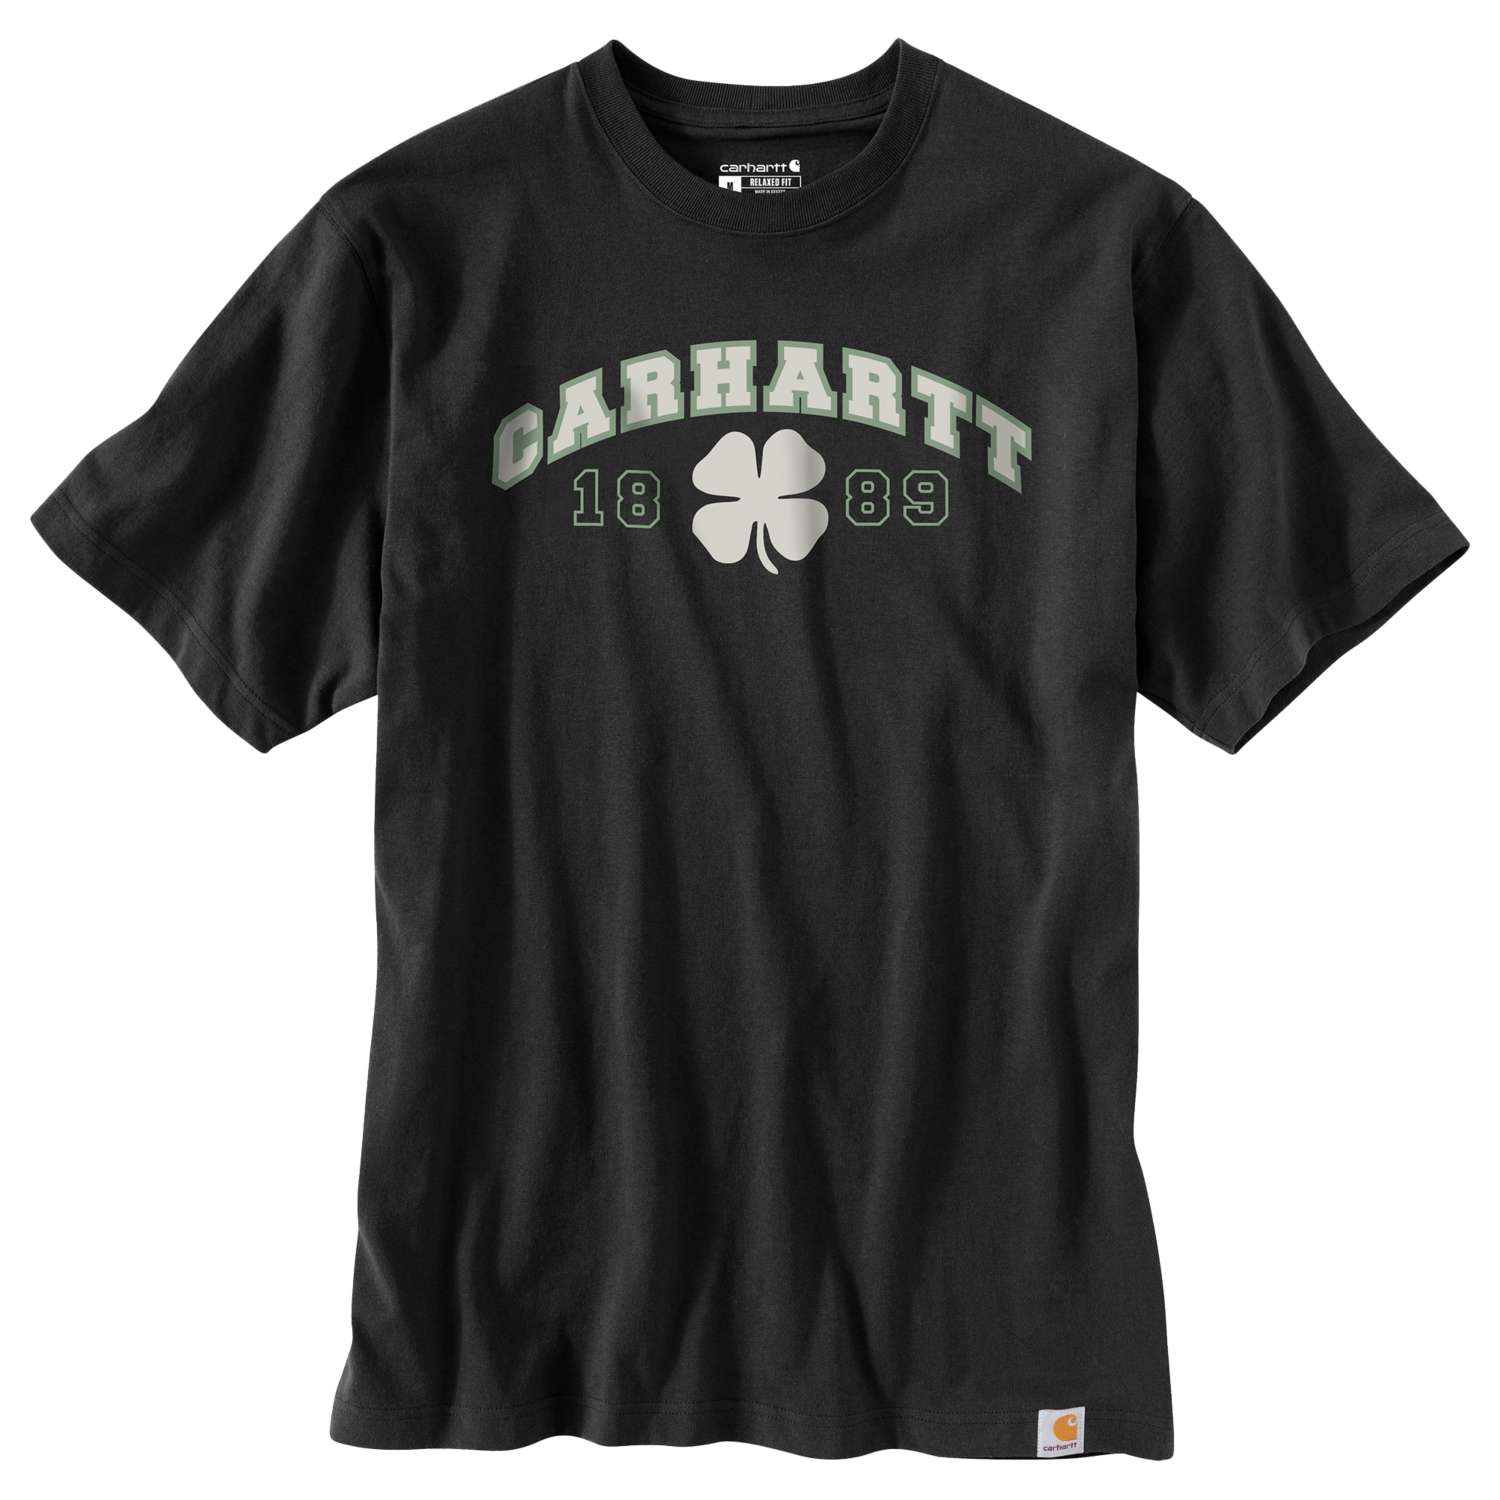 RELAXED_FIT_S_S_SHAMROCK_T-SHIRT_w5I3uZK8Gy